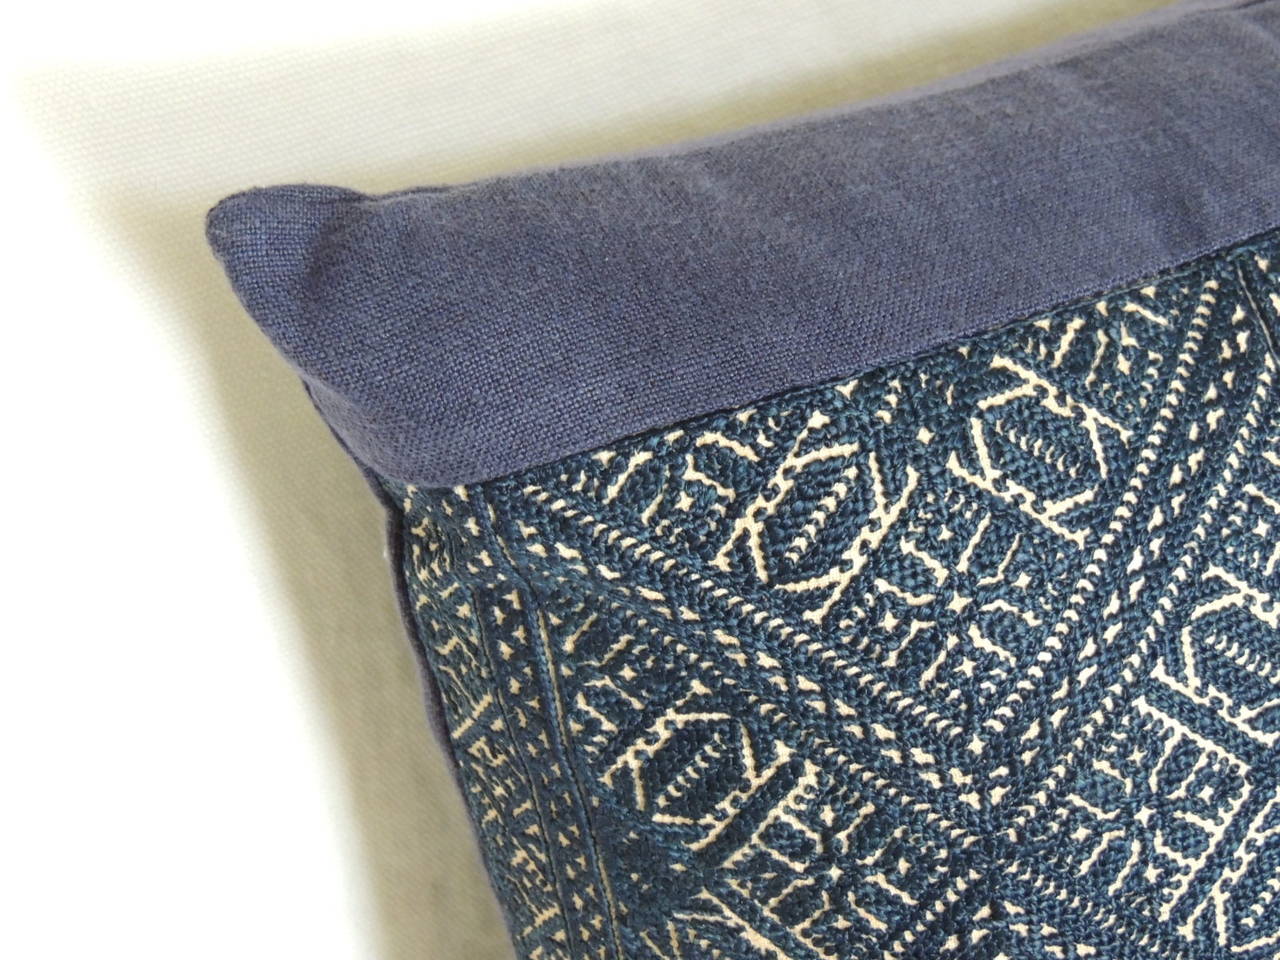 Large indigo Fez embroidery pillow with navy blue linen frame and backing. Tribal design.